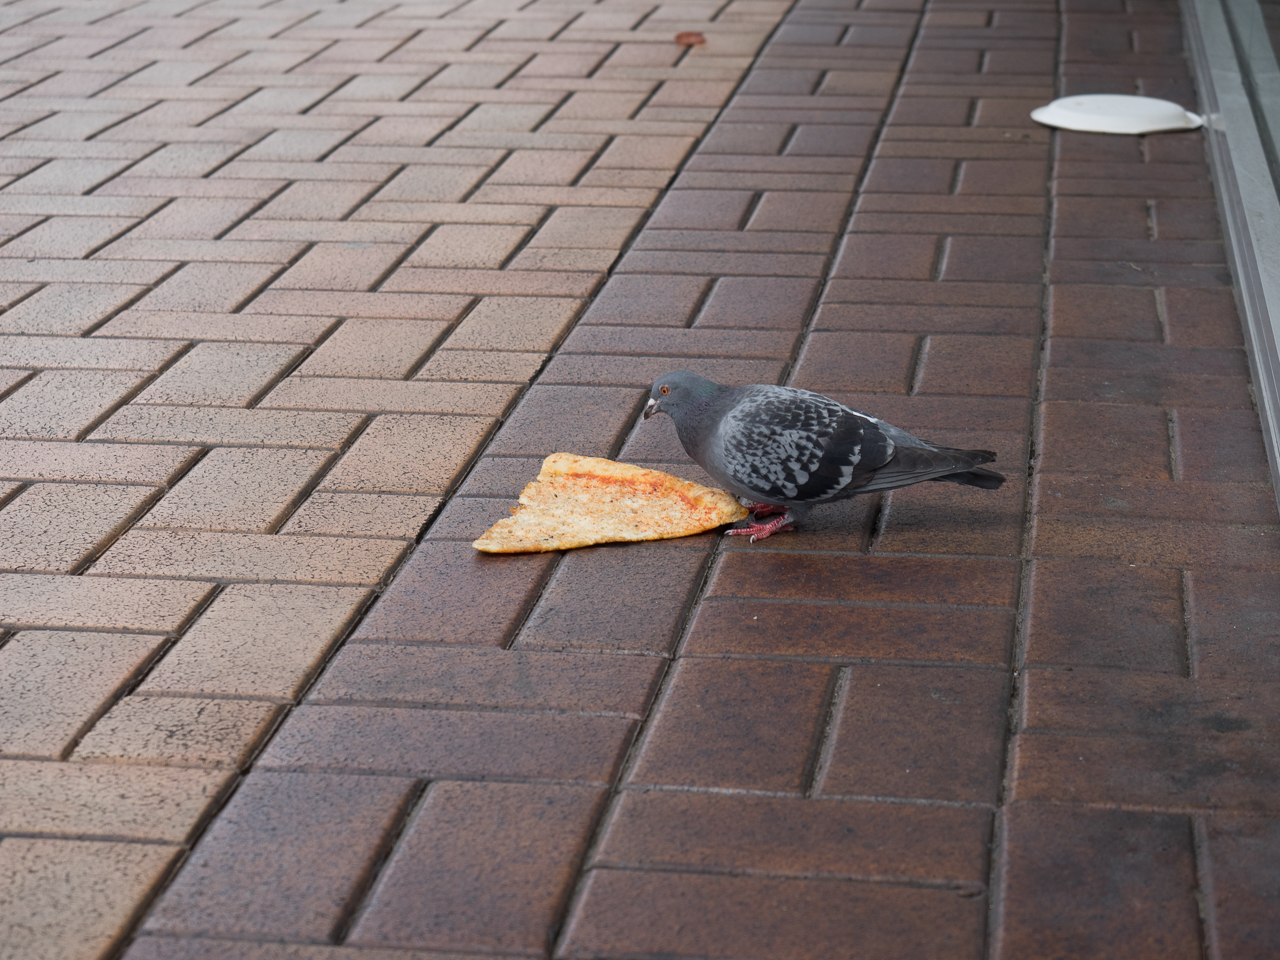 For a moment this was the happiest pigeon in all Wellington.